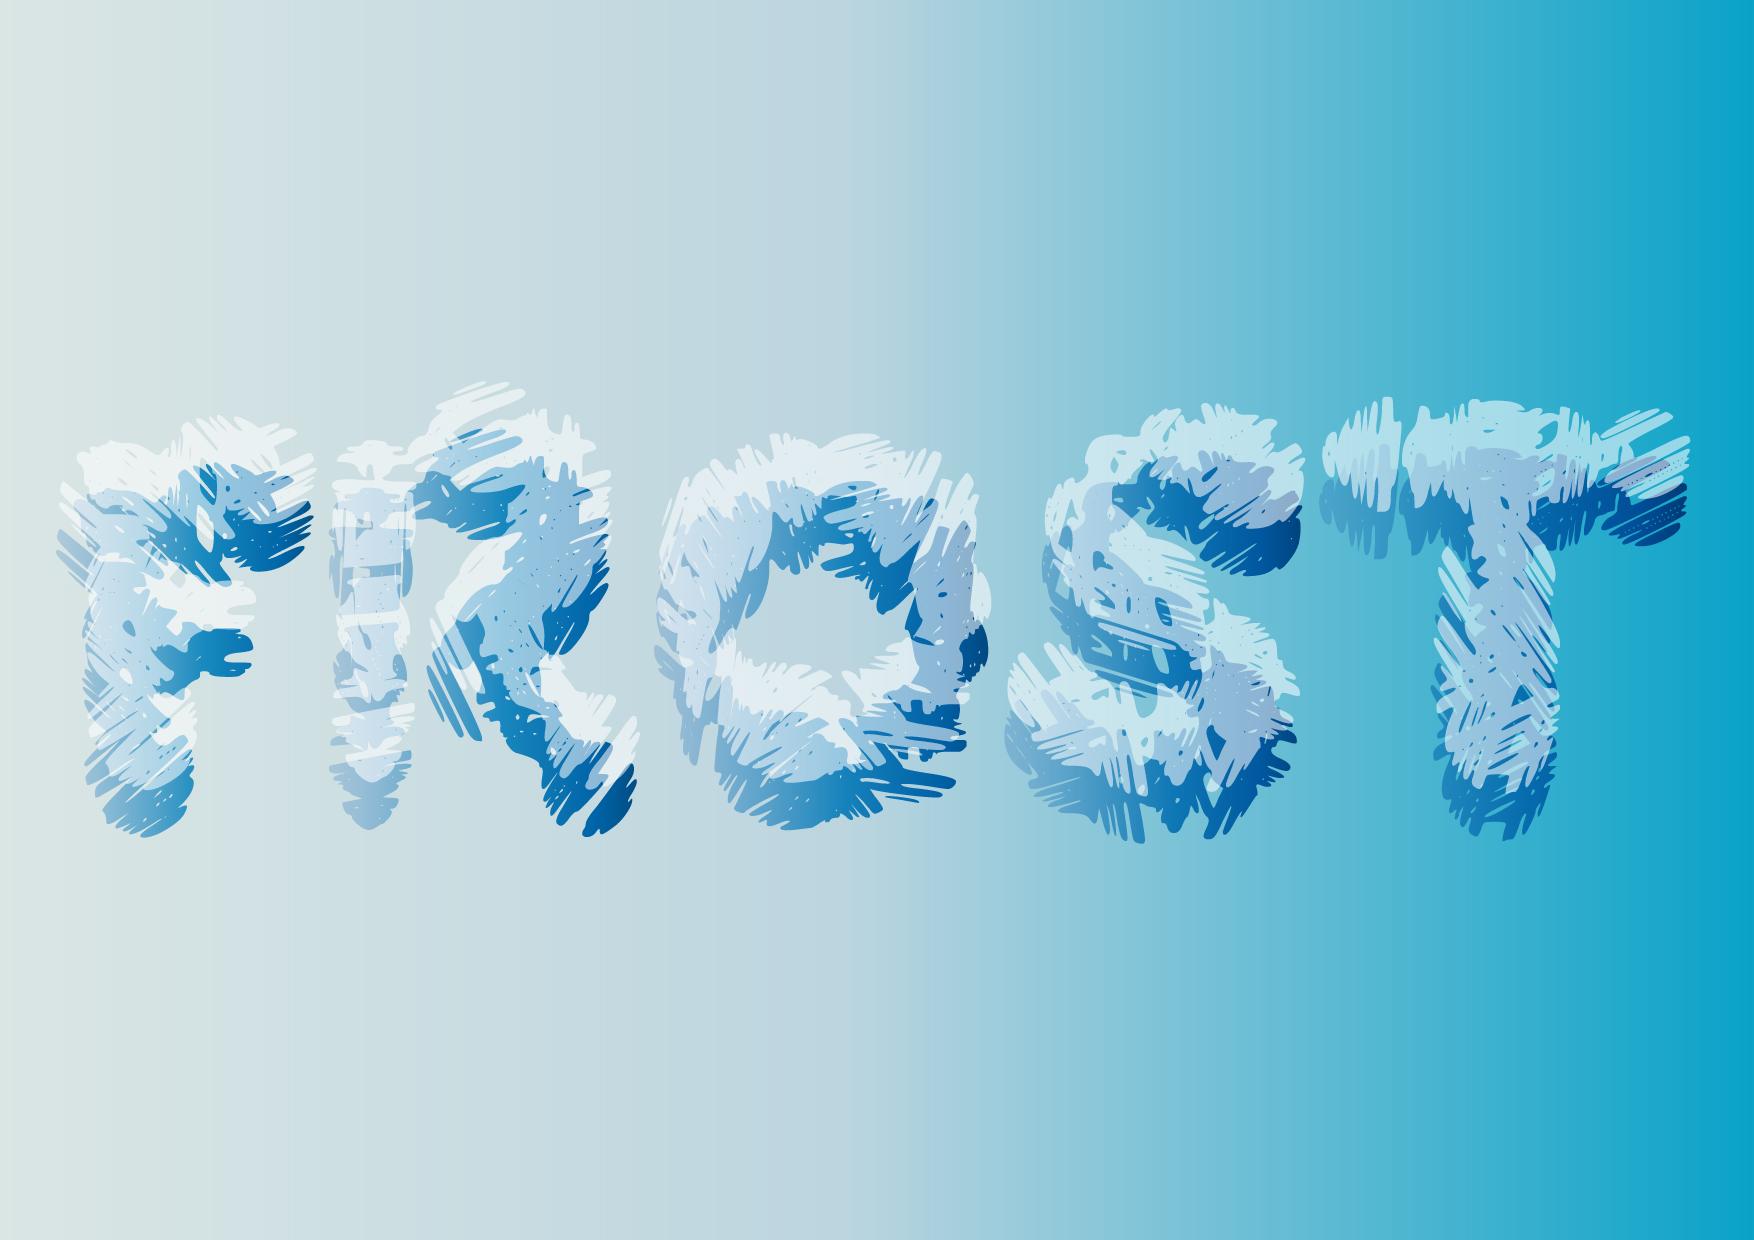 Frost Font